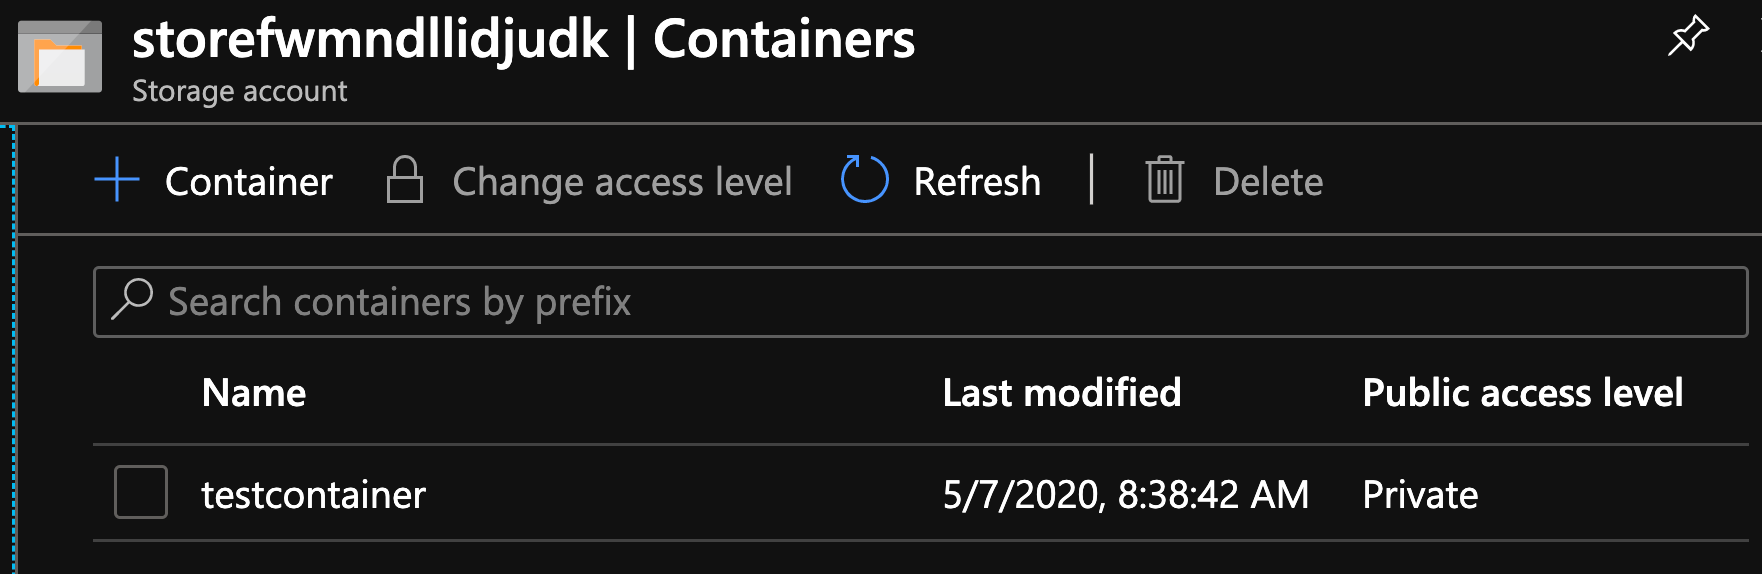 A container created in the storage account